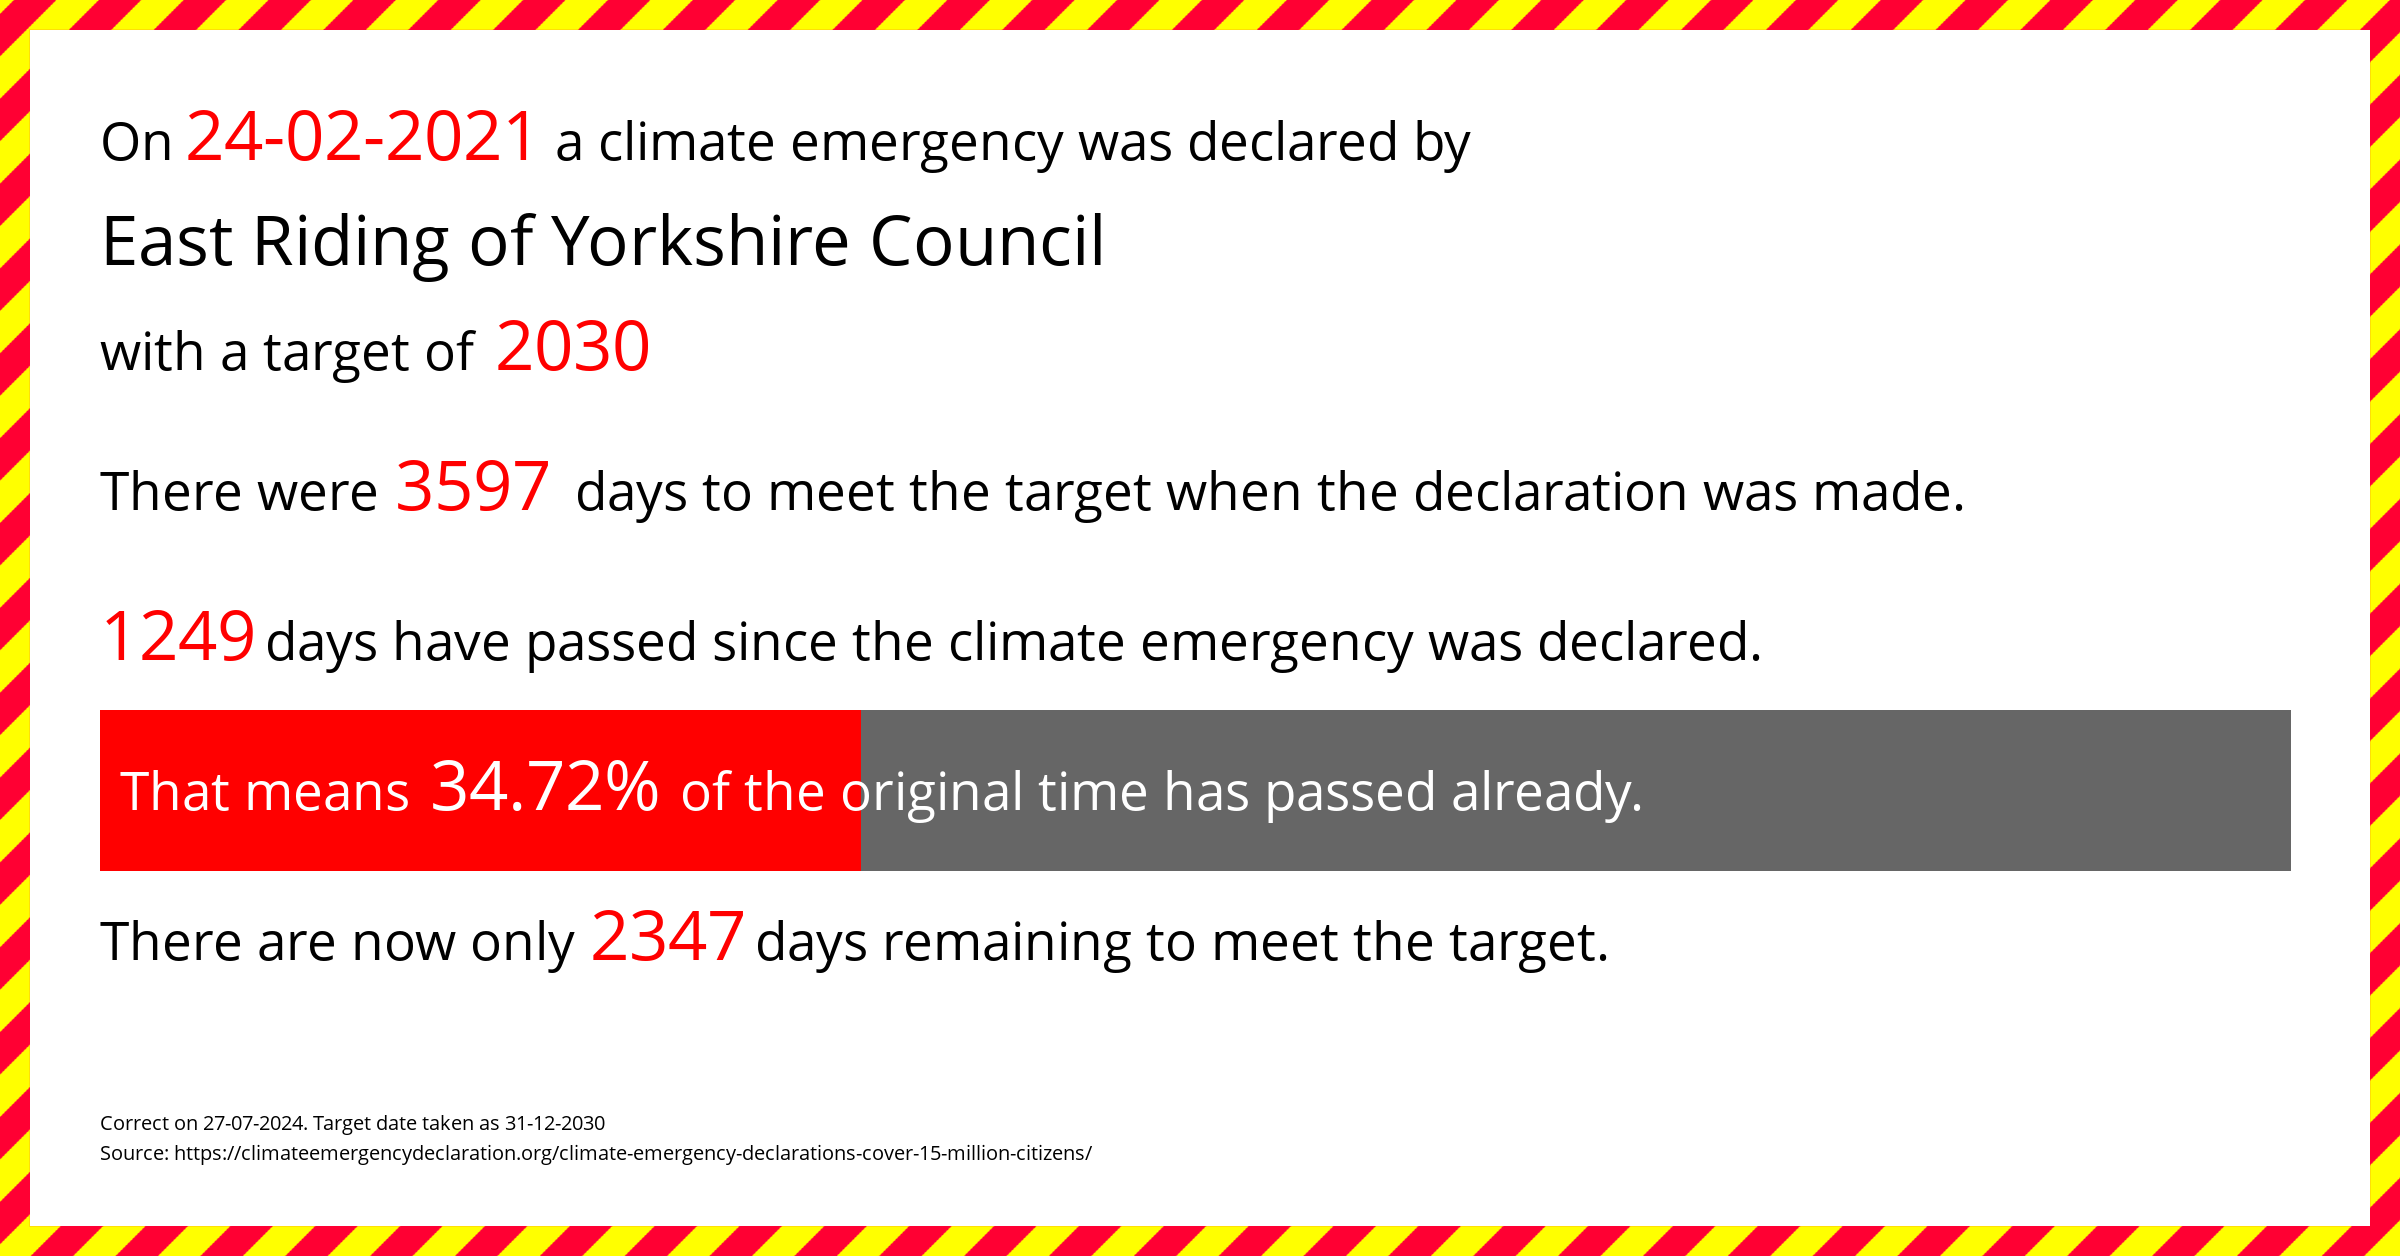 East Riding of Yorkshire Council  declared a Climate emergency on Wednesday 24th February 2021, with a target of 2030.